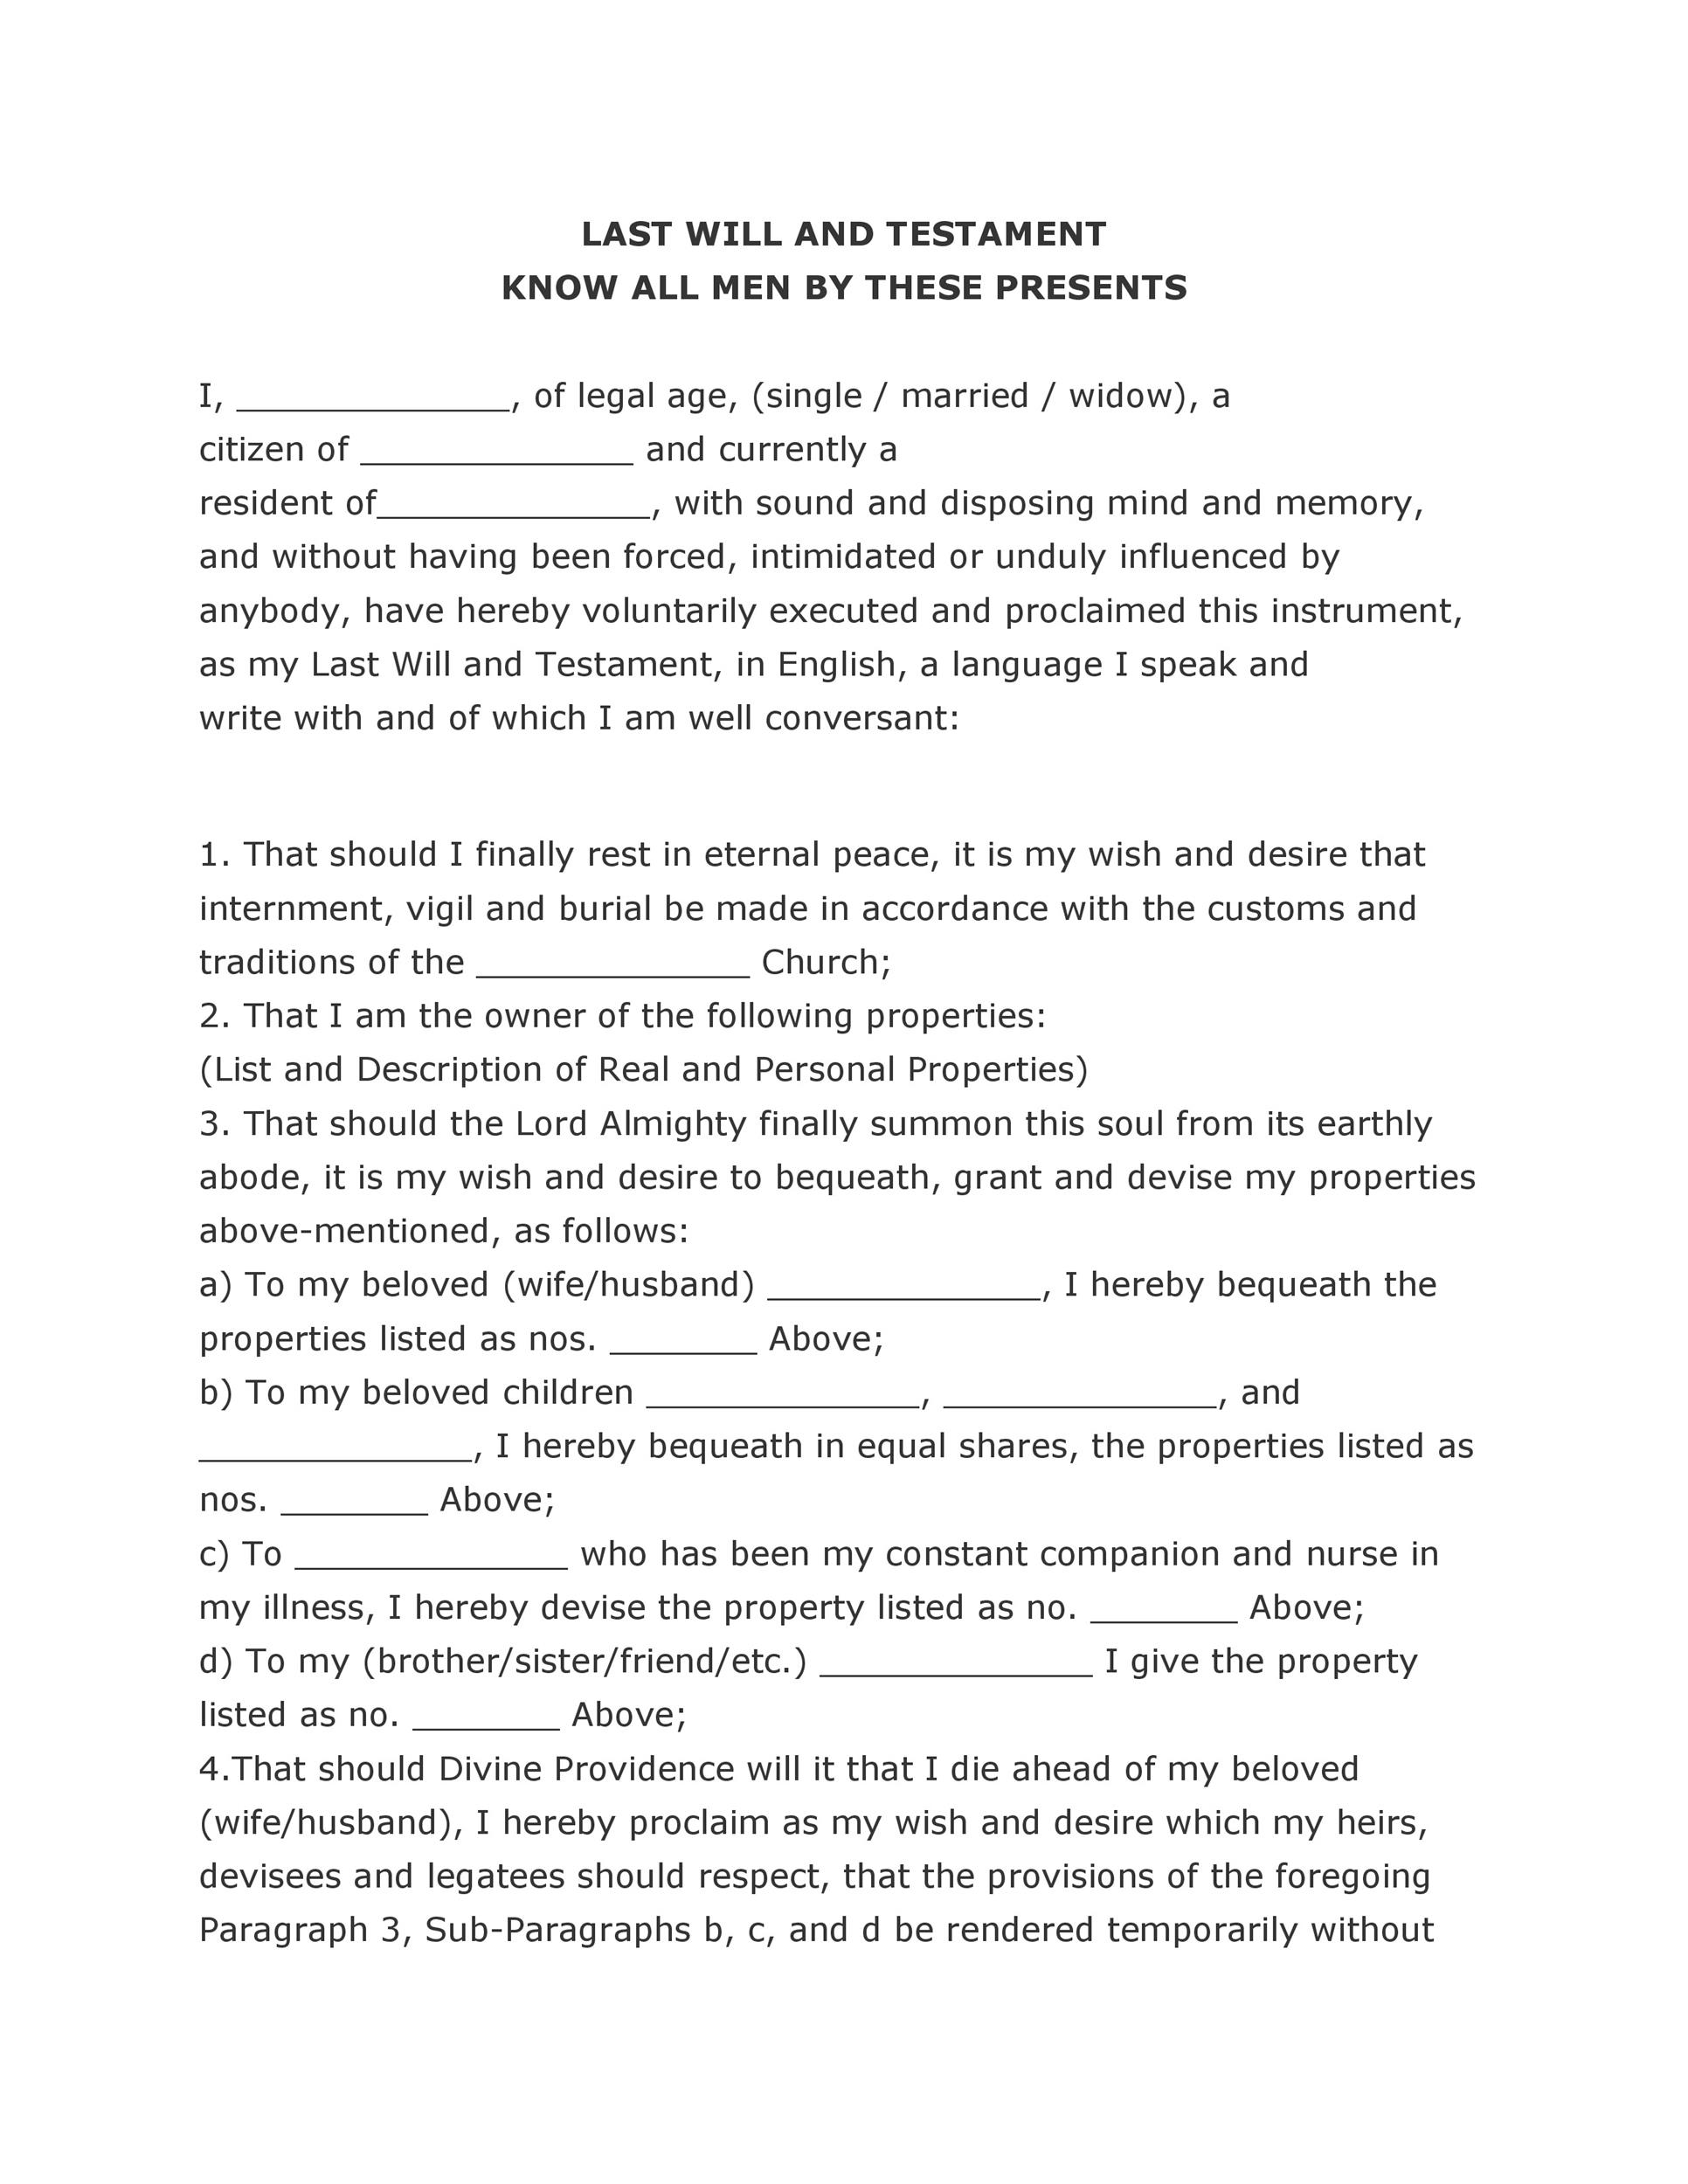 free-printable-last-will-and-testament-blank-forms-ga-printable-forms